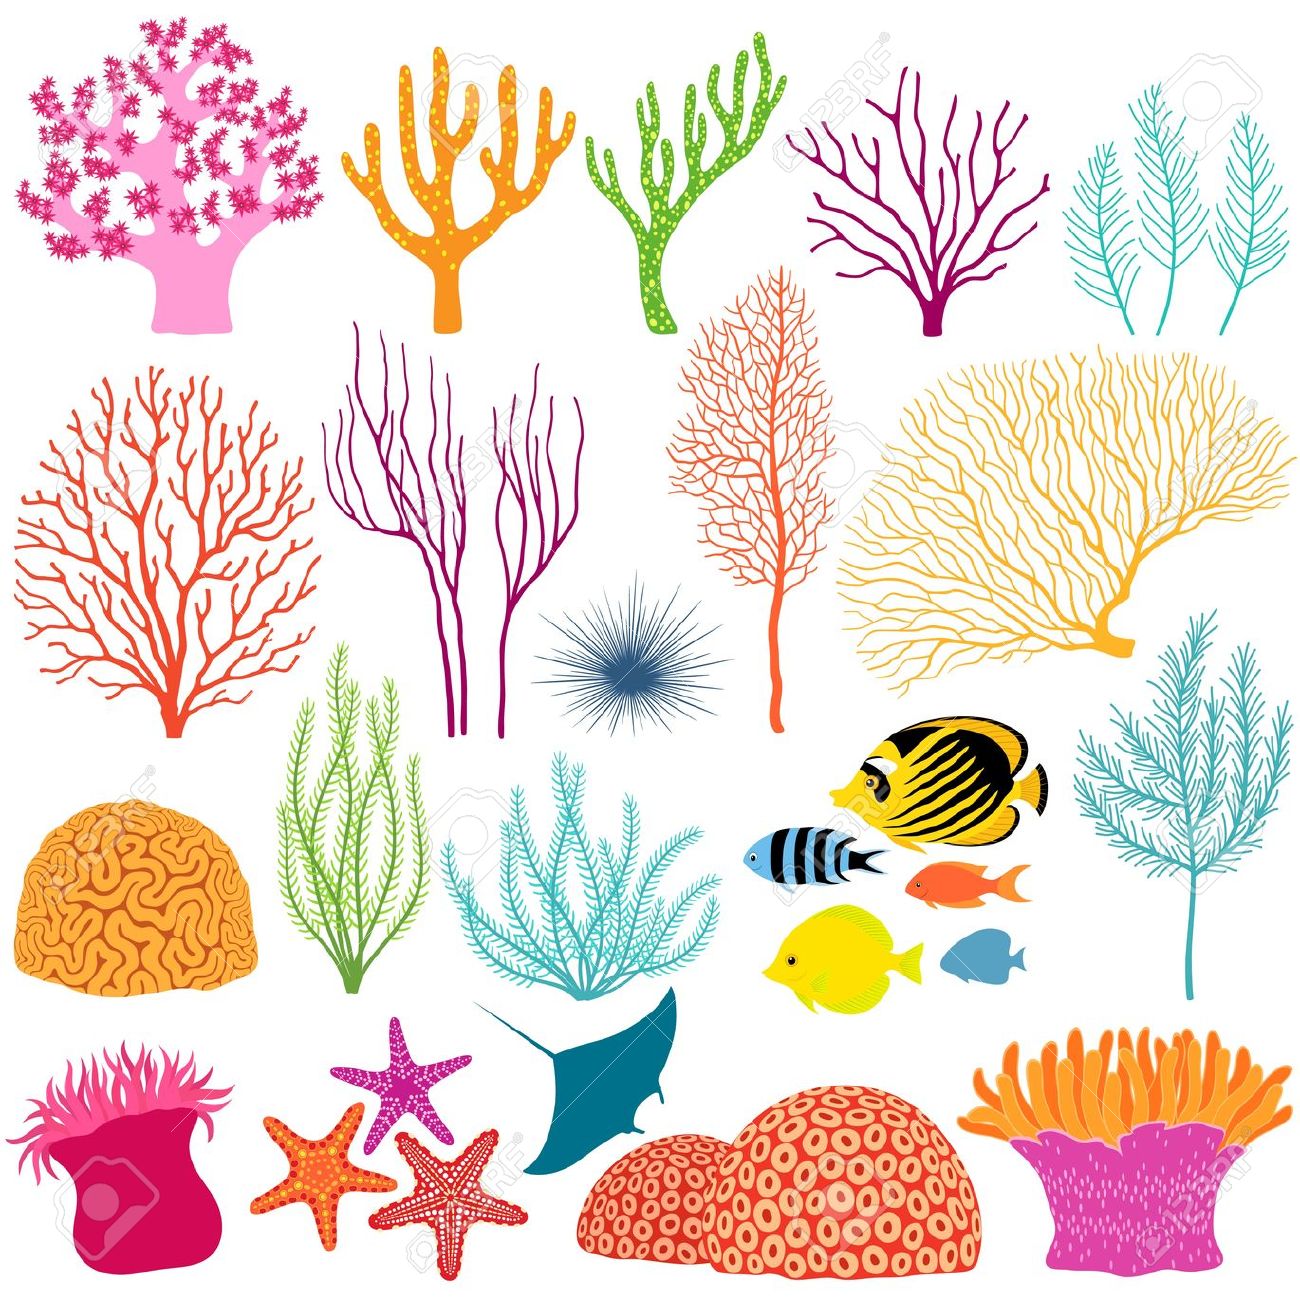 Cartoon Coral Reef Drawing - How To Draw A Coral Reef | Bodewasude